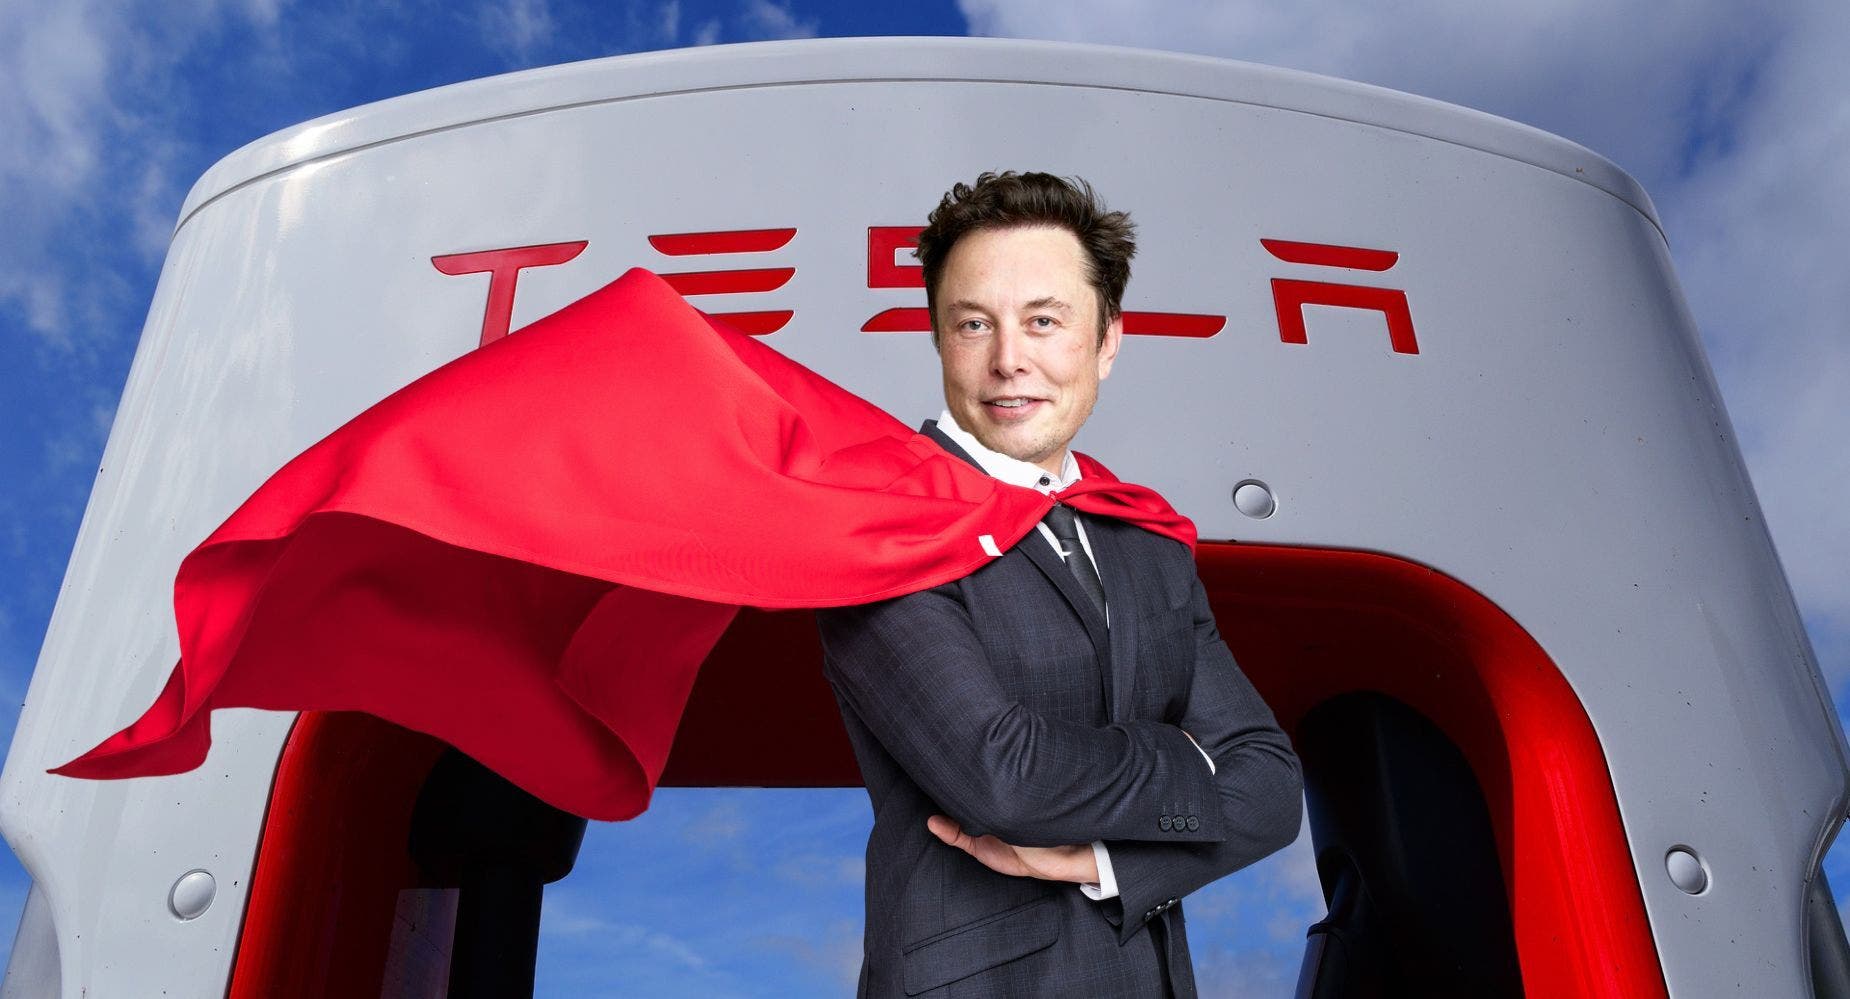 Why Elon Musk Has Gone From 'Superhero' To 'Villain': Will He Put 'Red Cape' Back On When Tesla Drops 'One Of The Most Important Earnings Calls' In History?